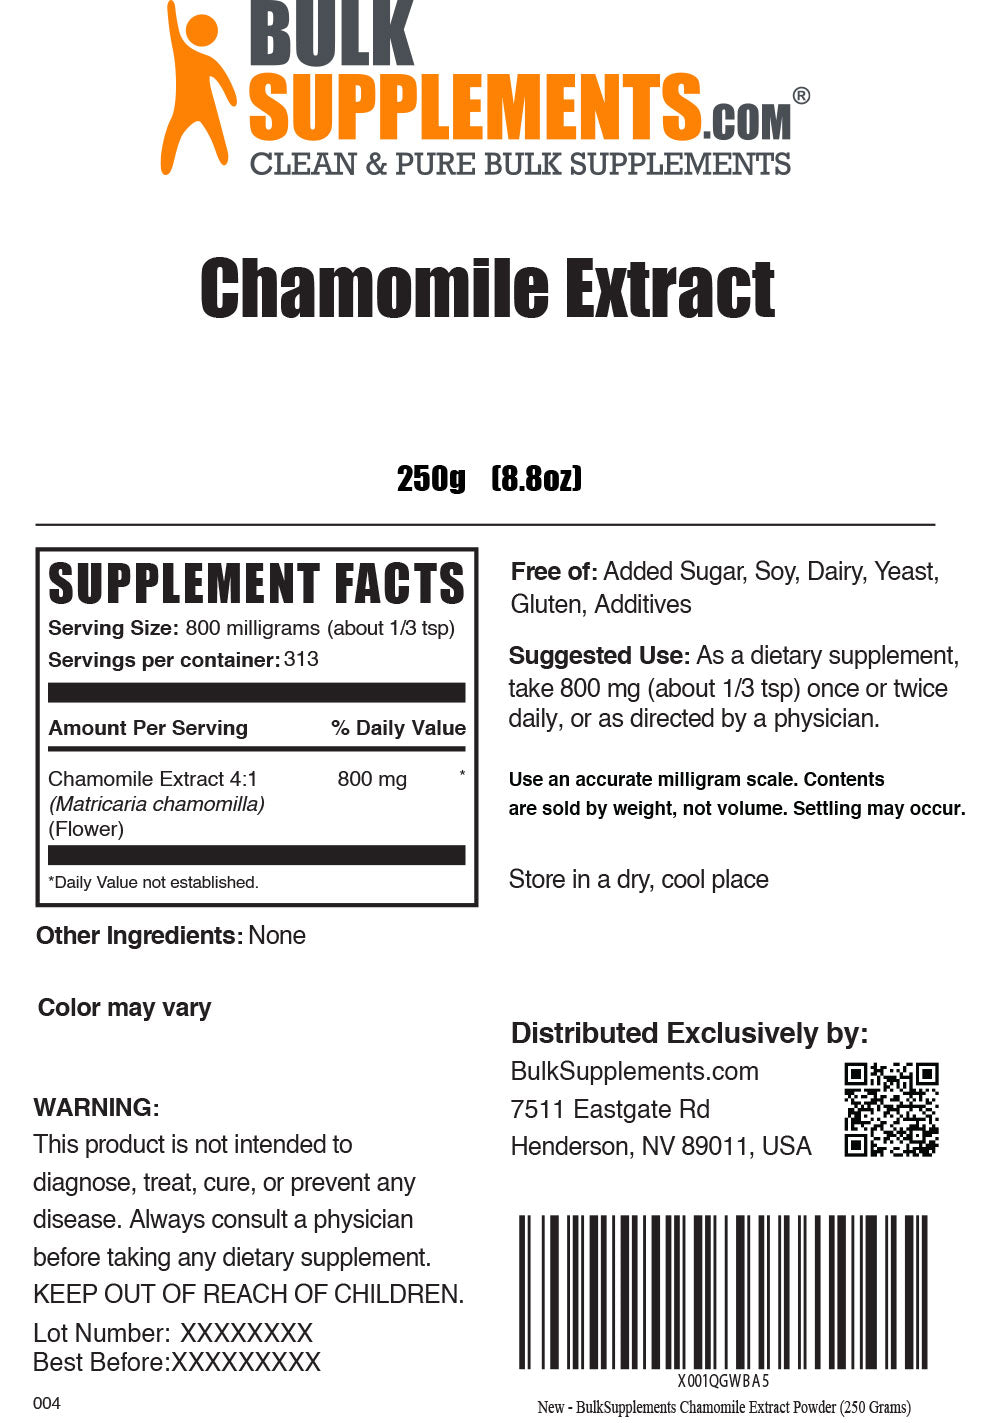 250g of chamomile extract supplement facts label